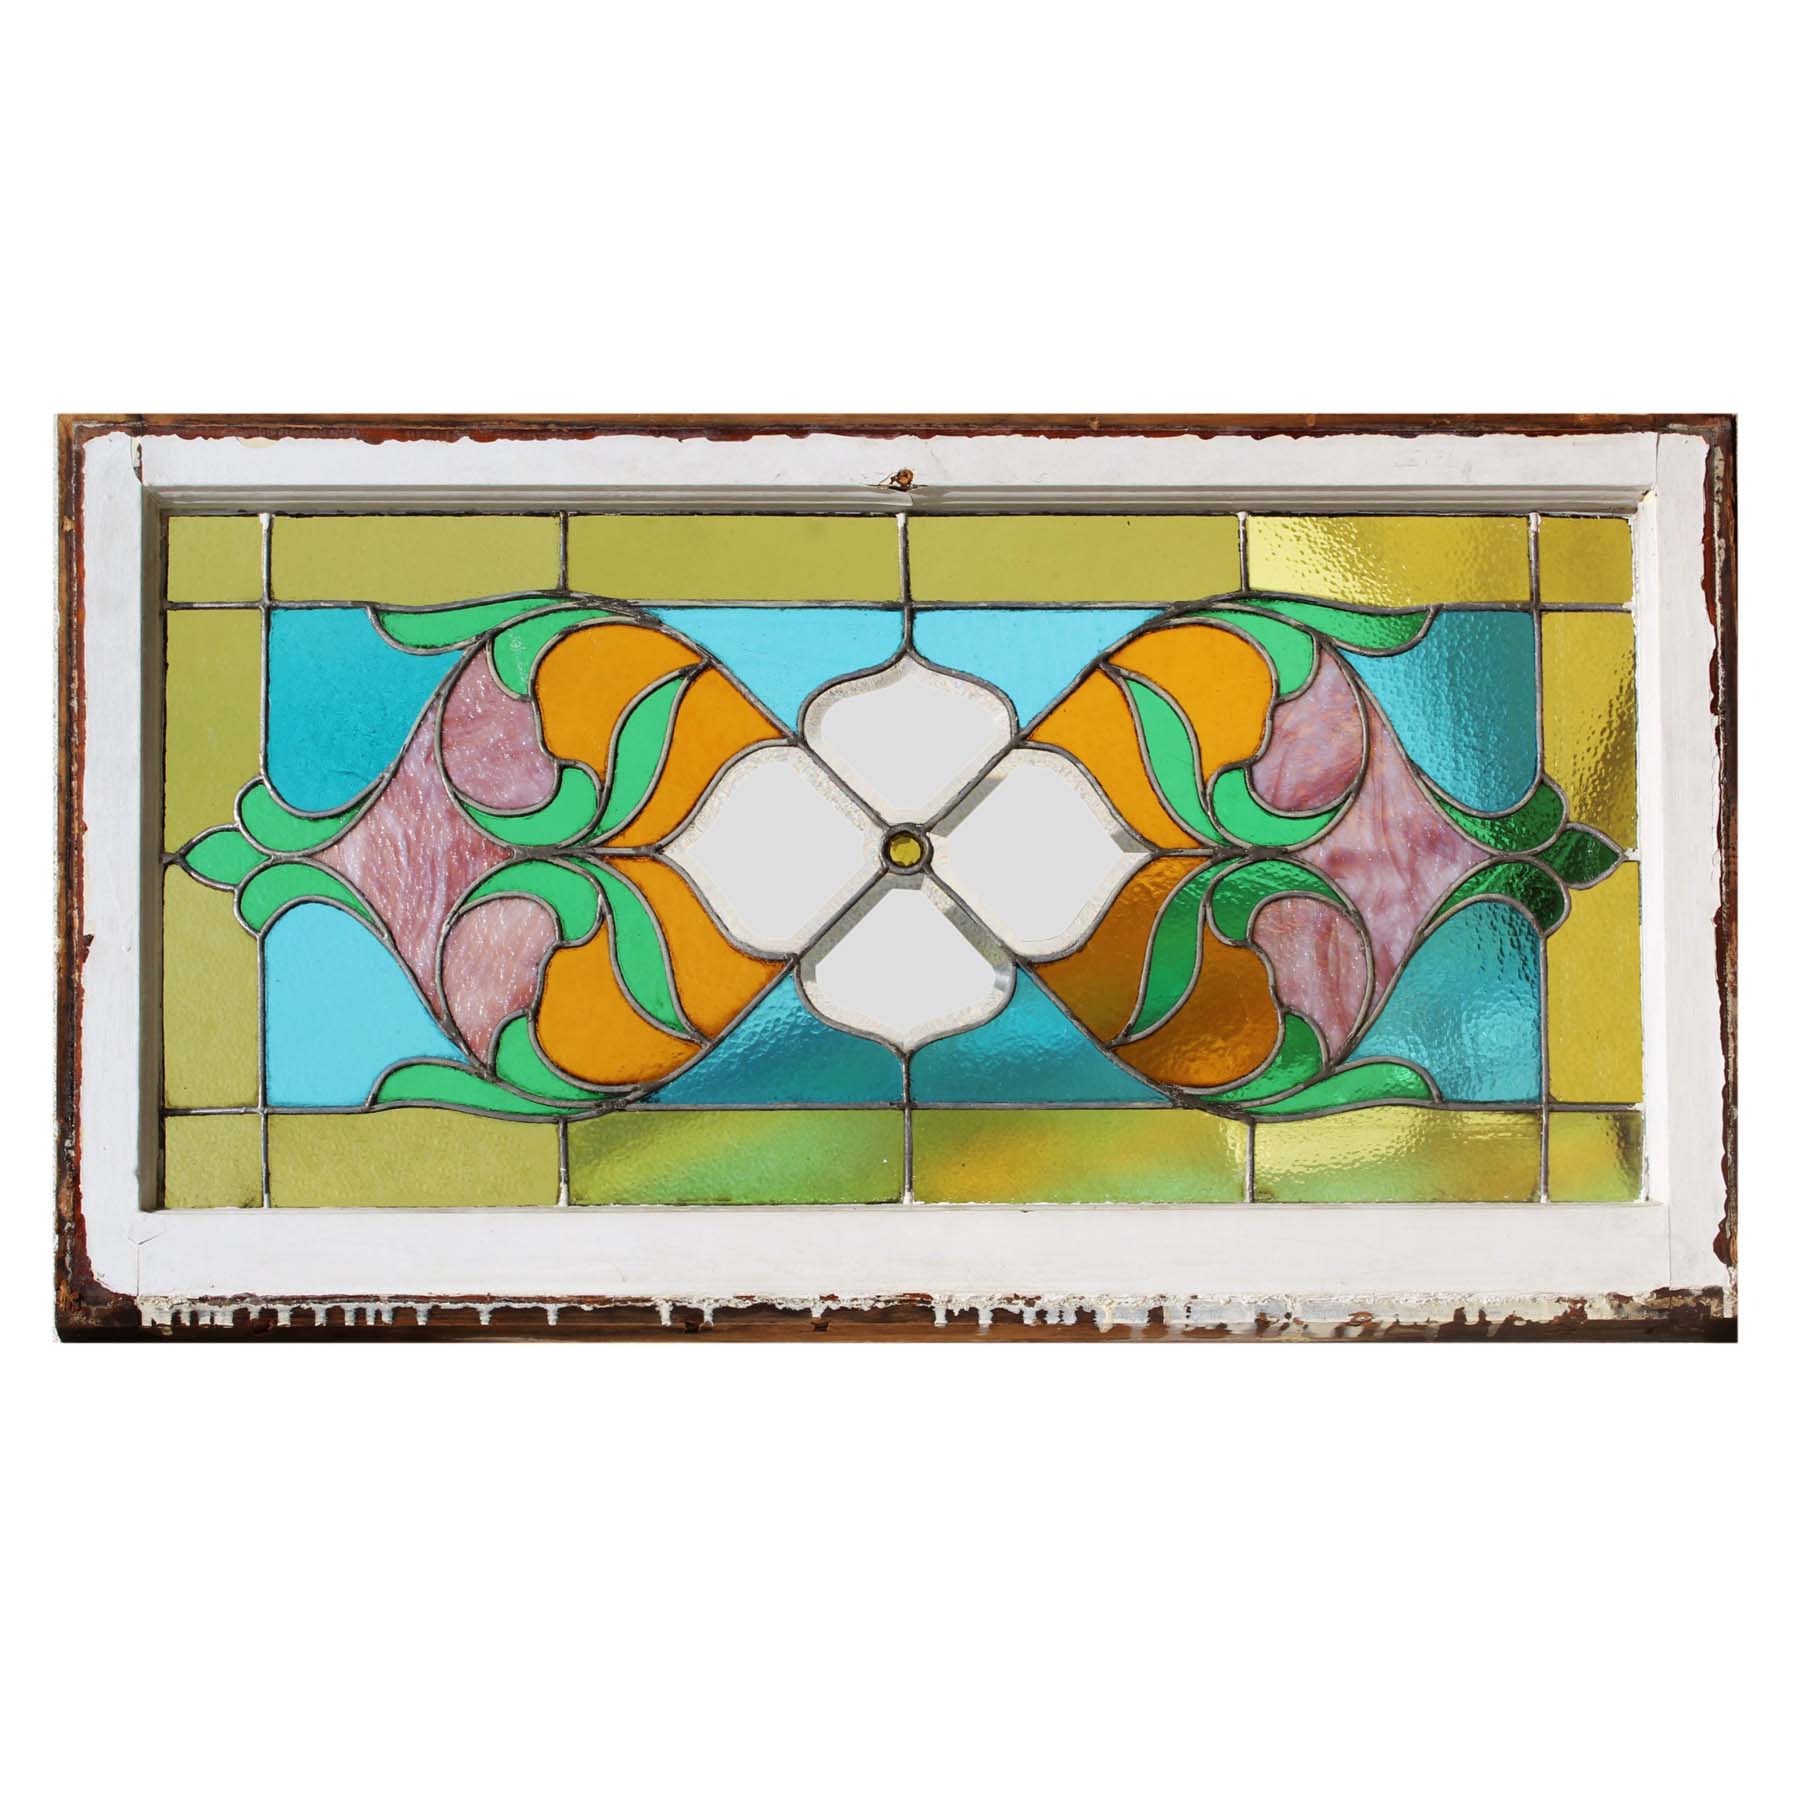 SOLD Antique American Stained Glass Transom with Flowers, c. 1900's-0